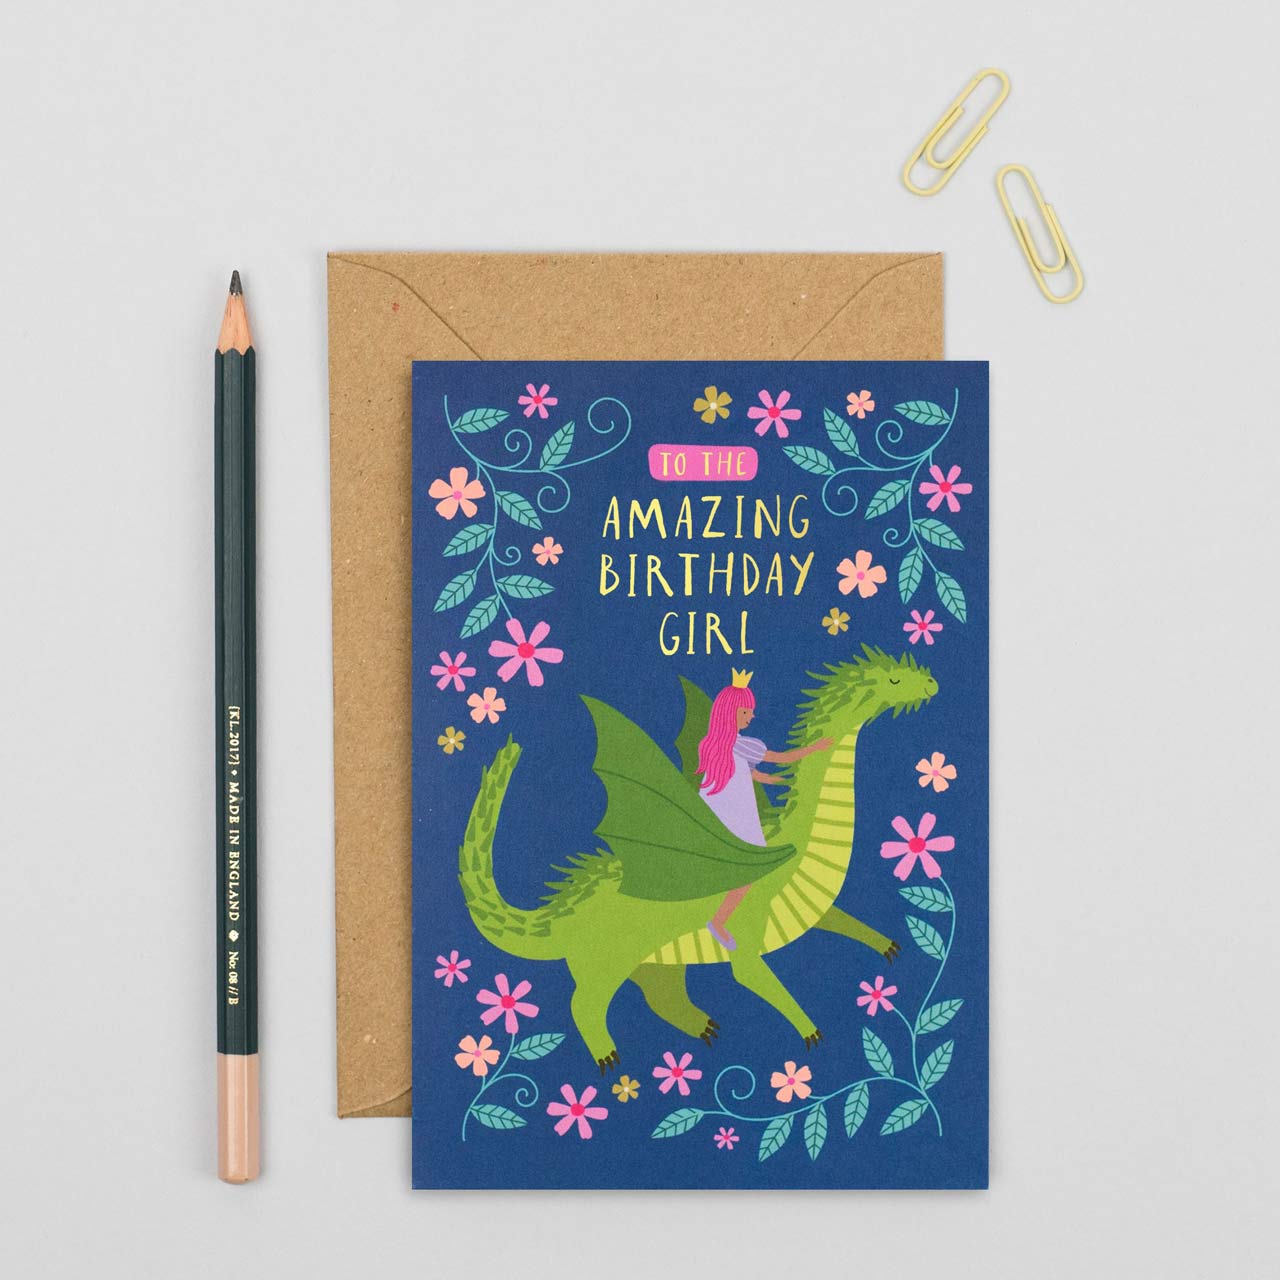 The Princess and the Dragon Gold Foil Birthday Card